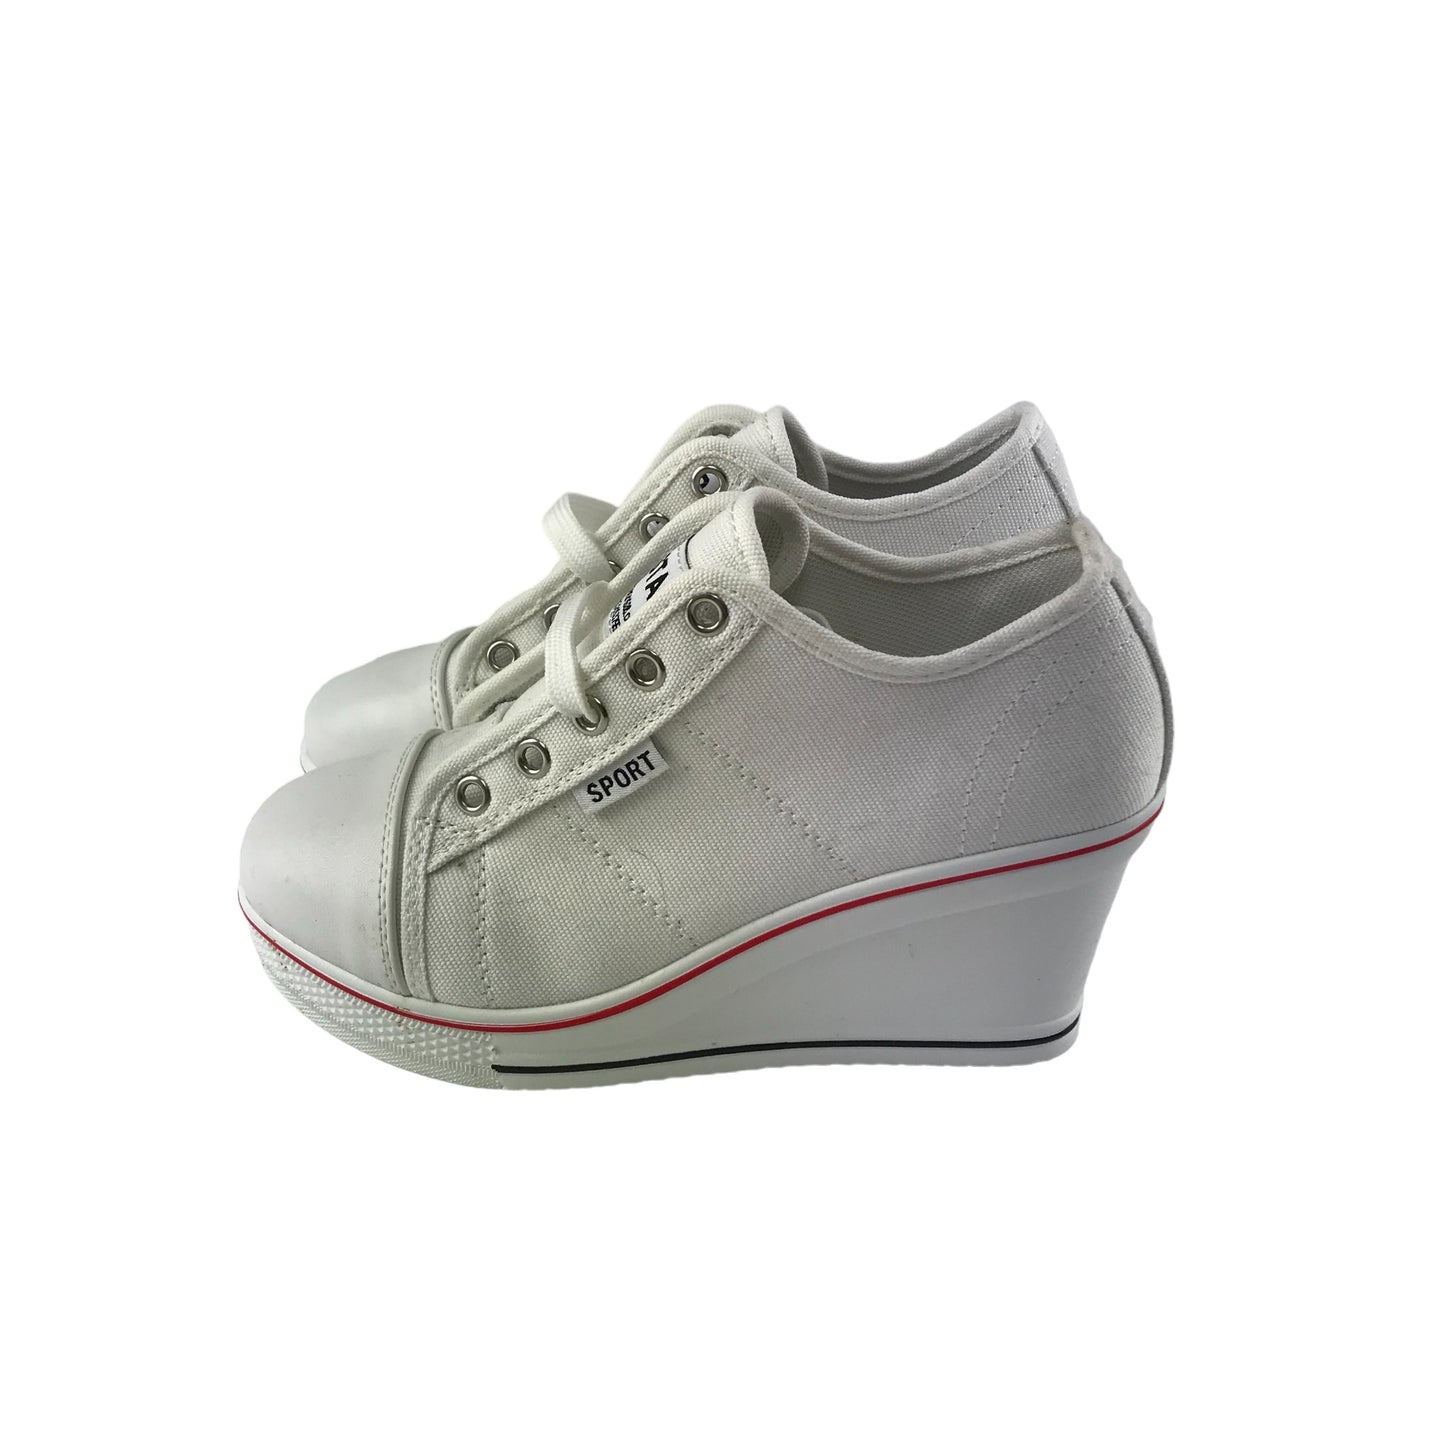 Yufu Star Wedge Trainers Shoe Size 5 White Sneakers with Block Heel and Laces